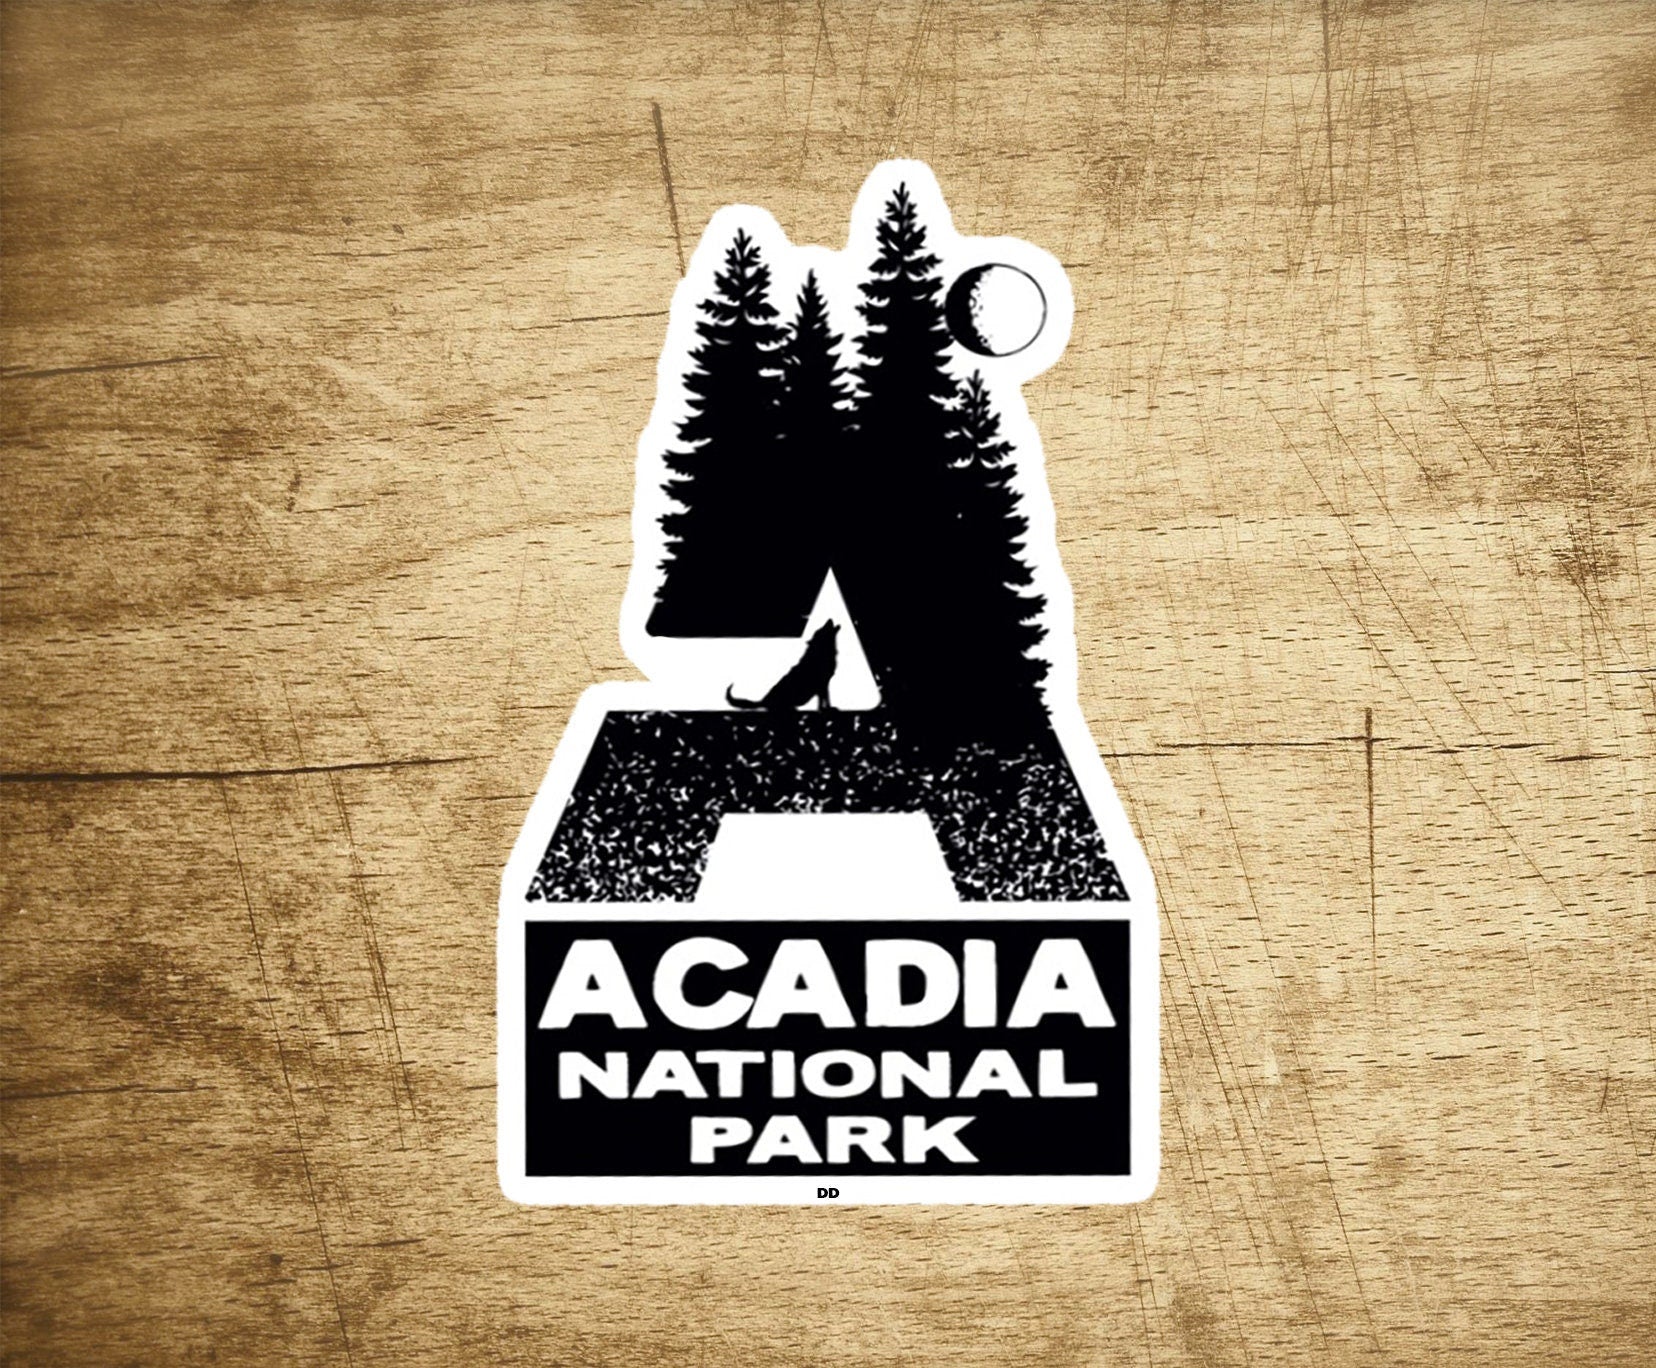 Acadia National Park Maine Sticker Decal 3 3/4" x 2 1/8" Vacation